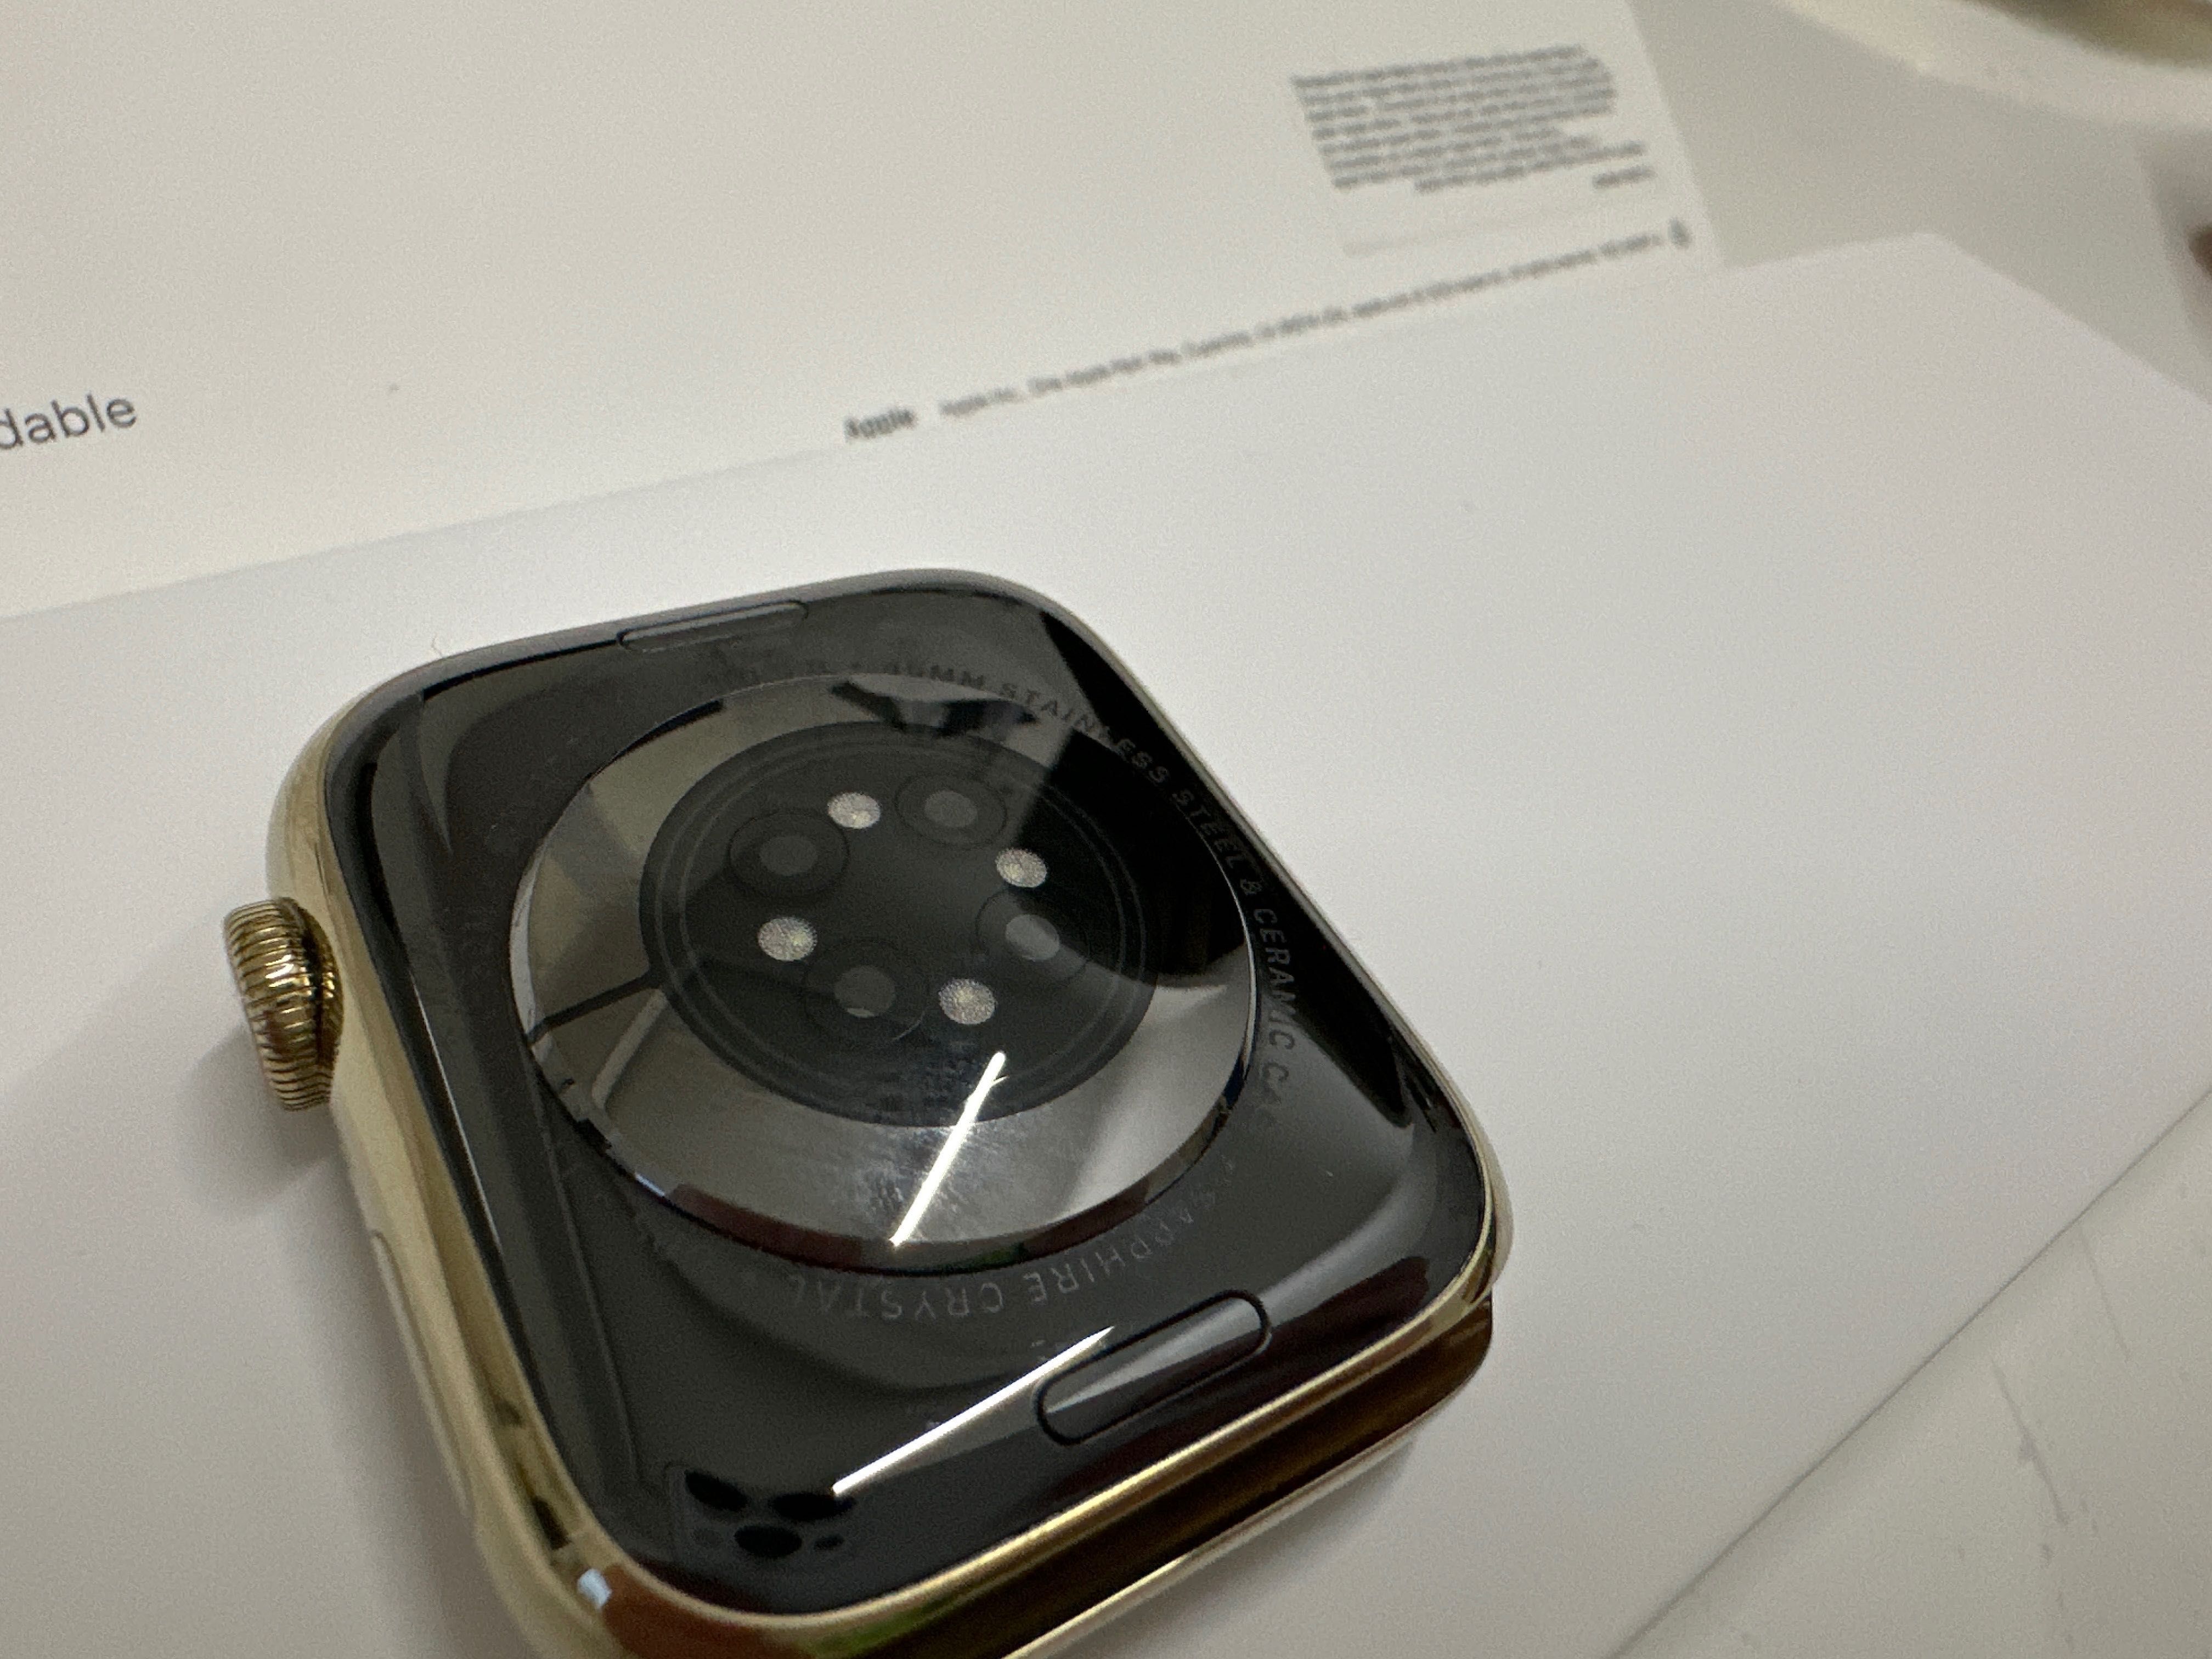 Apple Watch s8-45 stainless steel case. Gold